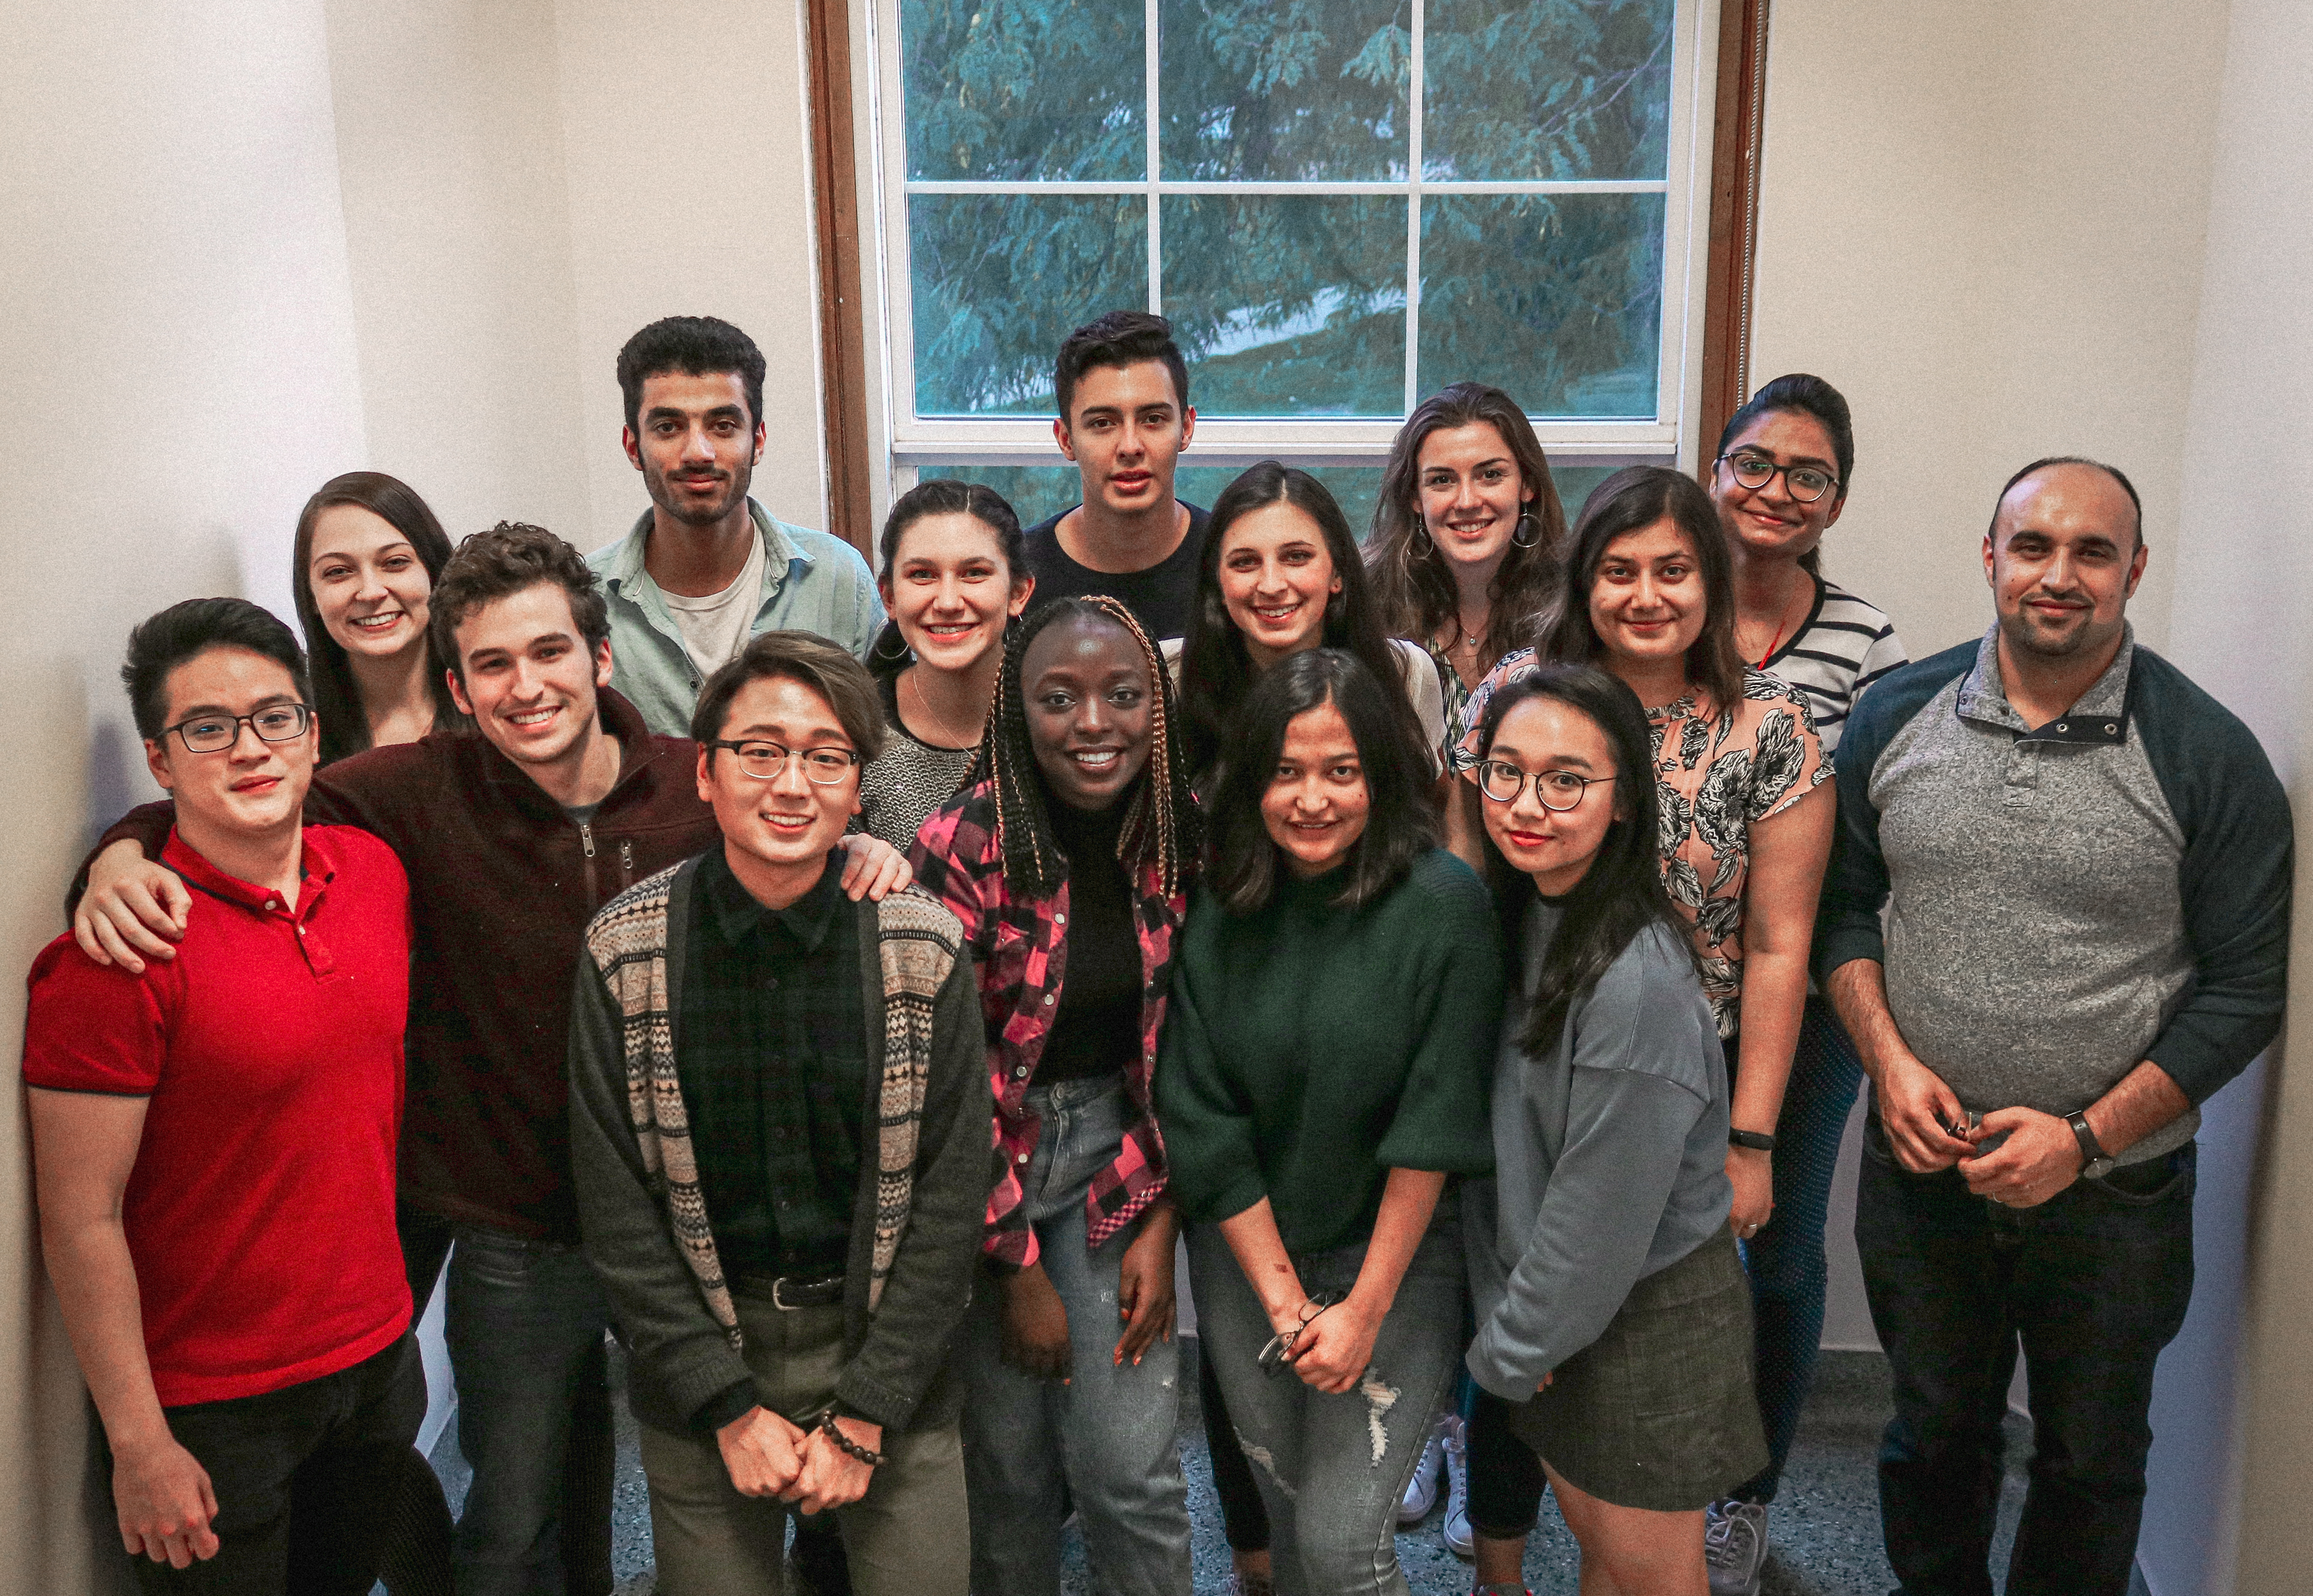 The 2019-20 Global Peer Assistant team is made up of 15 domestic and international students from around the world to help build connections on campus for new international students. Junior Linh Tran is pictured at the bottom right.